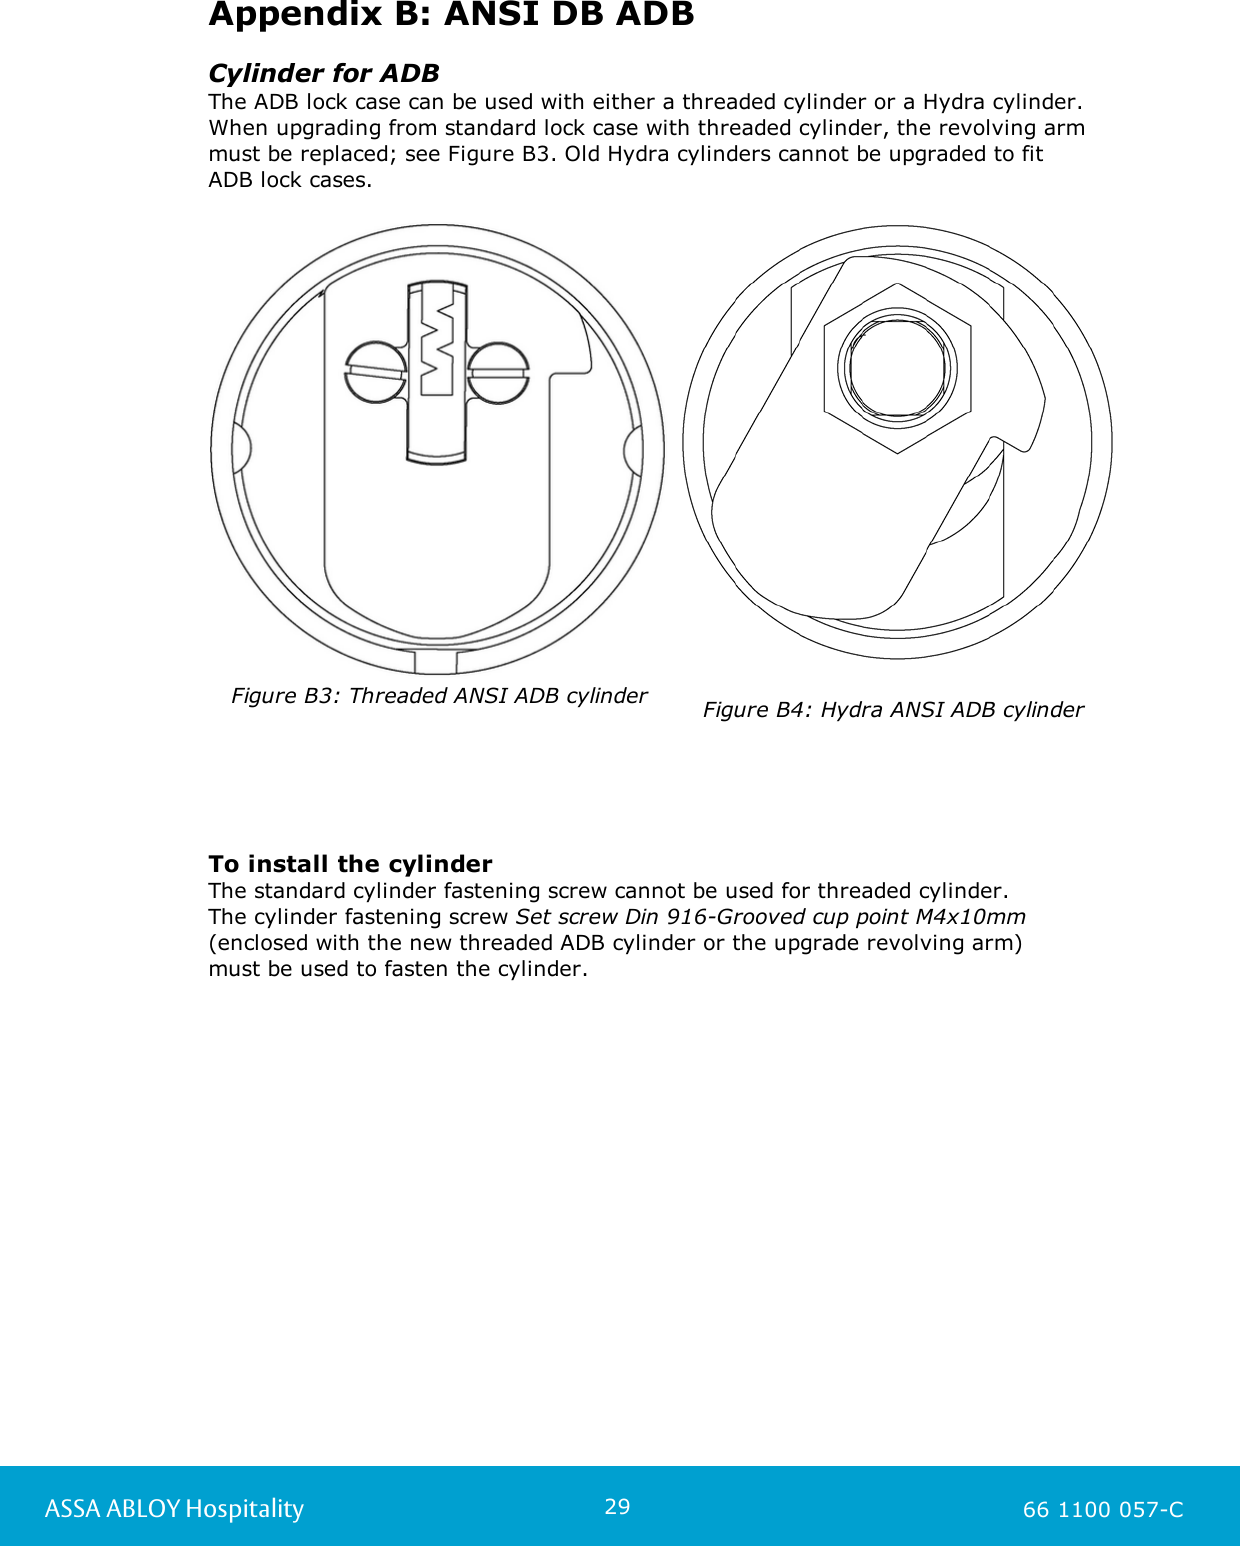 29ASSA ABLOY Hospitality 66 1100 057-CAppendix B: ANSI DB ADBCylinder for ADBThe ADB lock case can be used with either a threaded cylinder or a Hydra cylinder.When upgrading from standard lock case with threaded cylinder, the revolving armmust be replaced; see Figure B3. Old Hydra cylinders cannot be upgraded to fit ADB lock cases.Figure B3: Threaded ANSI ADB cylinderFigure B4: Hydra ANSI ADB cylinderTo install the cylinderThe standard cylinder fastening screw cannot be used for threaded cylinder. The cylinder fastening screw Set screw Din 916-Grooved cup point M4x10mm(enclosed with the new threaded ADB cylinder or the upgrade revolving arm) must be used to fasten the cylinder.